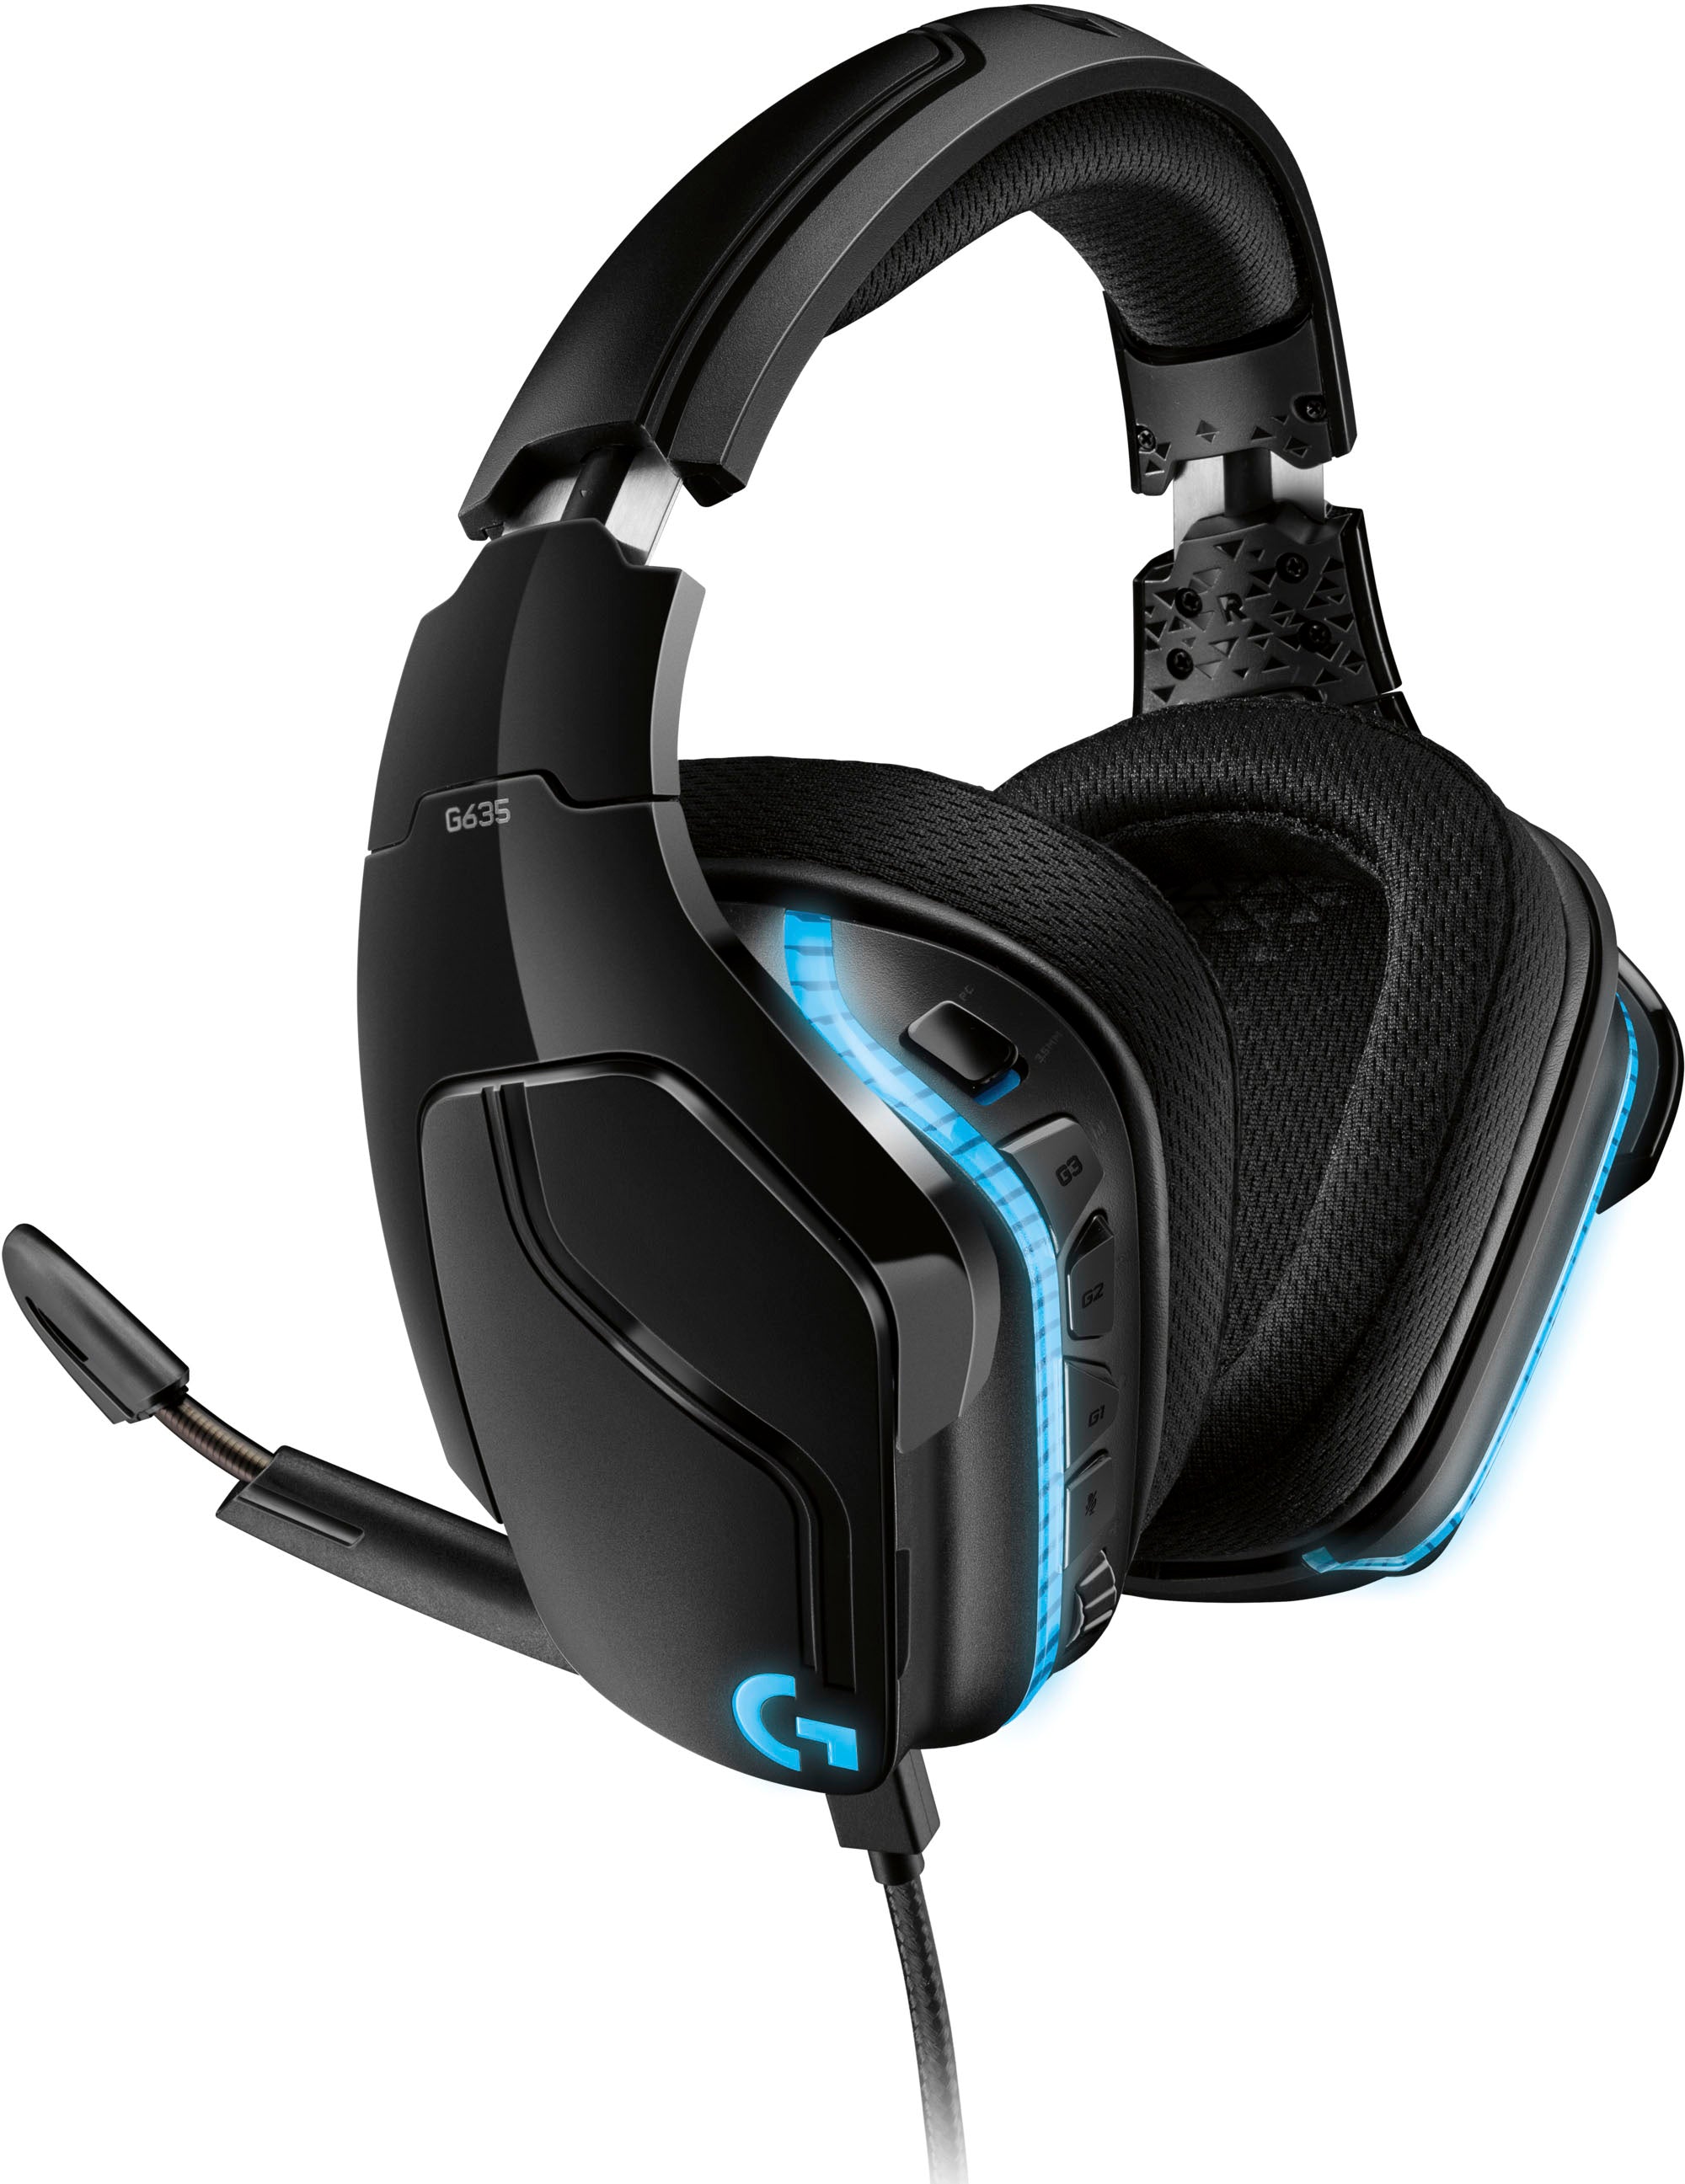 Logitech - 981-000748 G635 Wired 7.1 Surround Sound Over-the-Ear Gaming Headset for PC with LIGHTSYNC RGB Lighting - Black/Blue